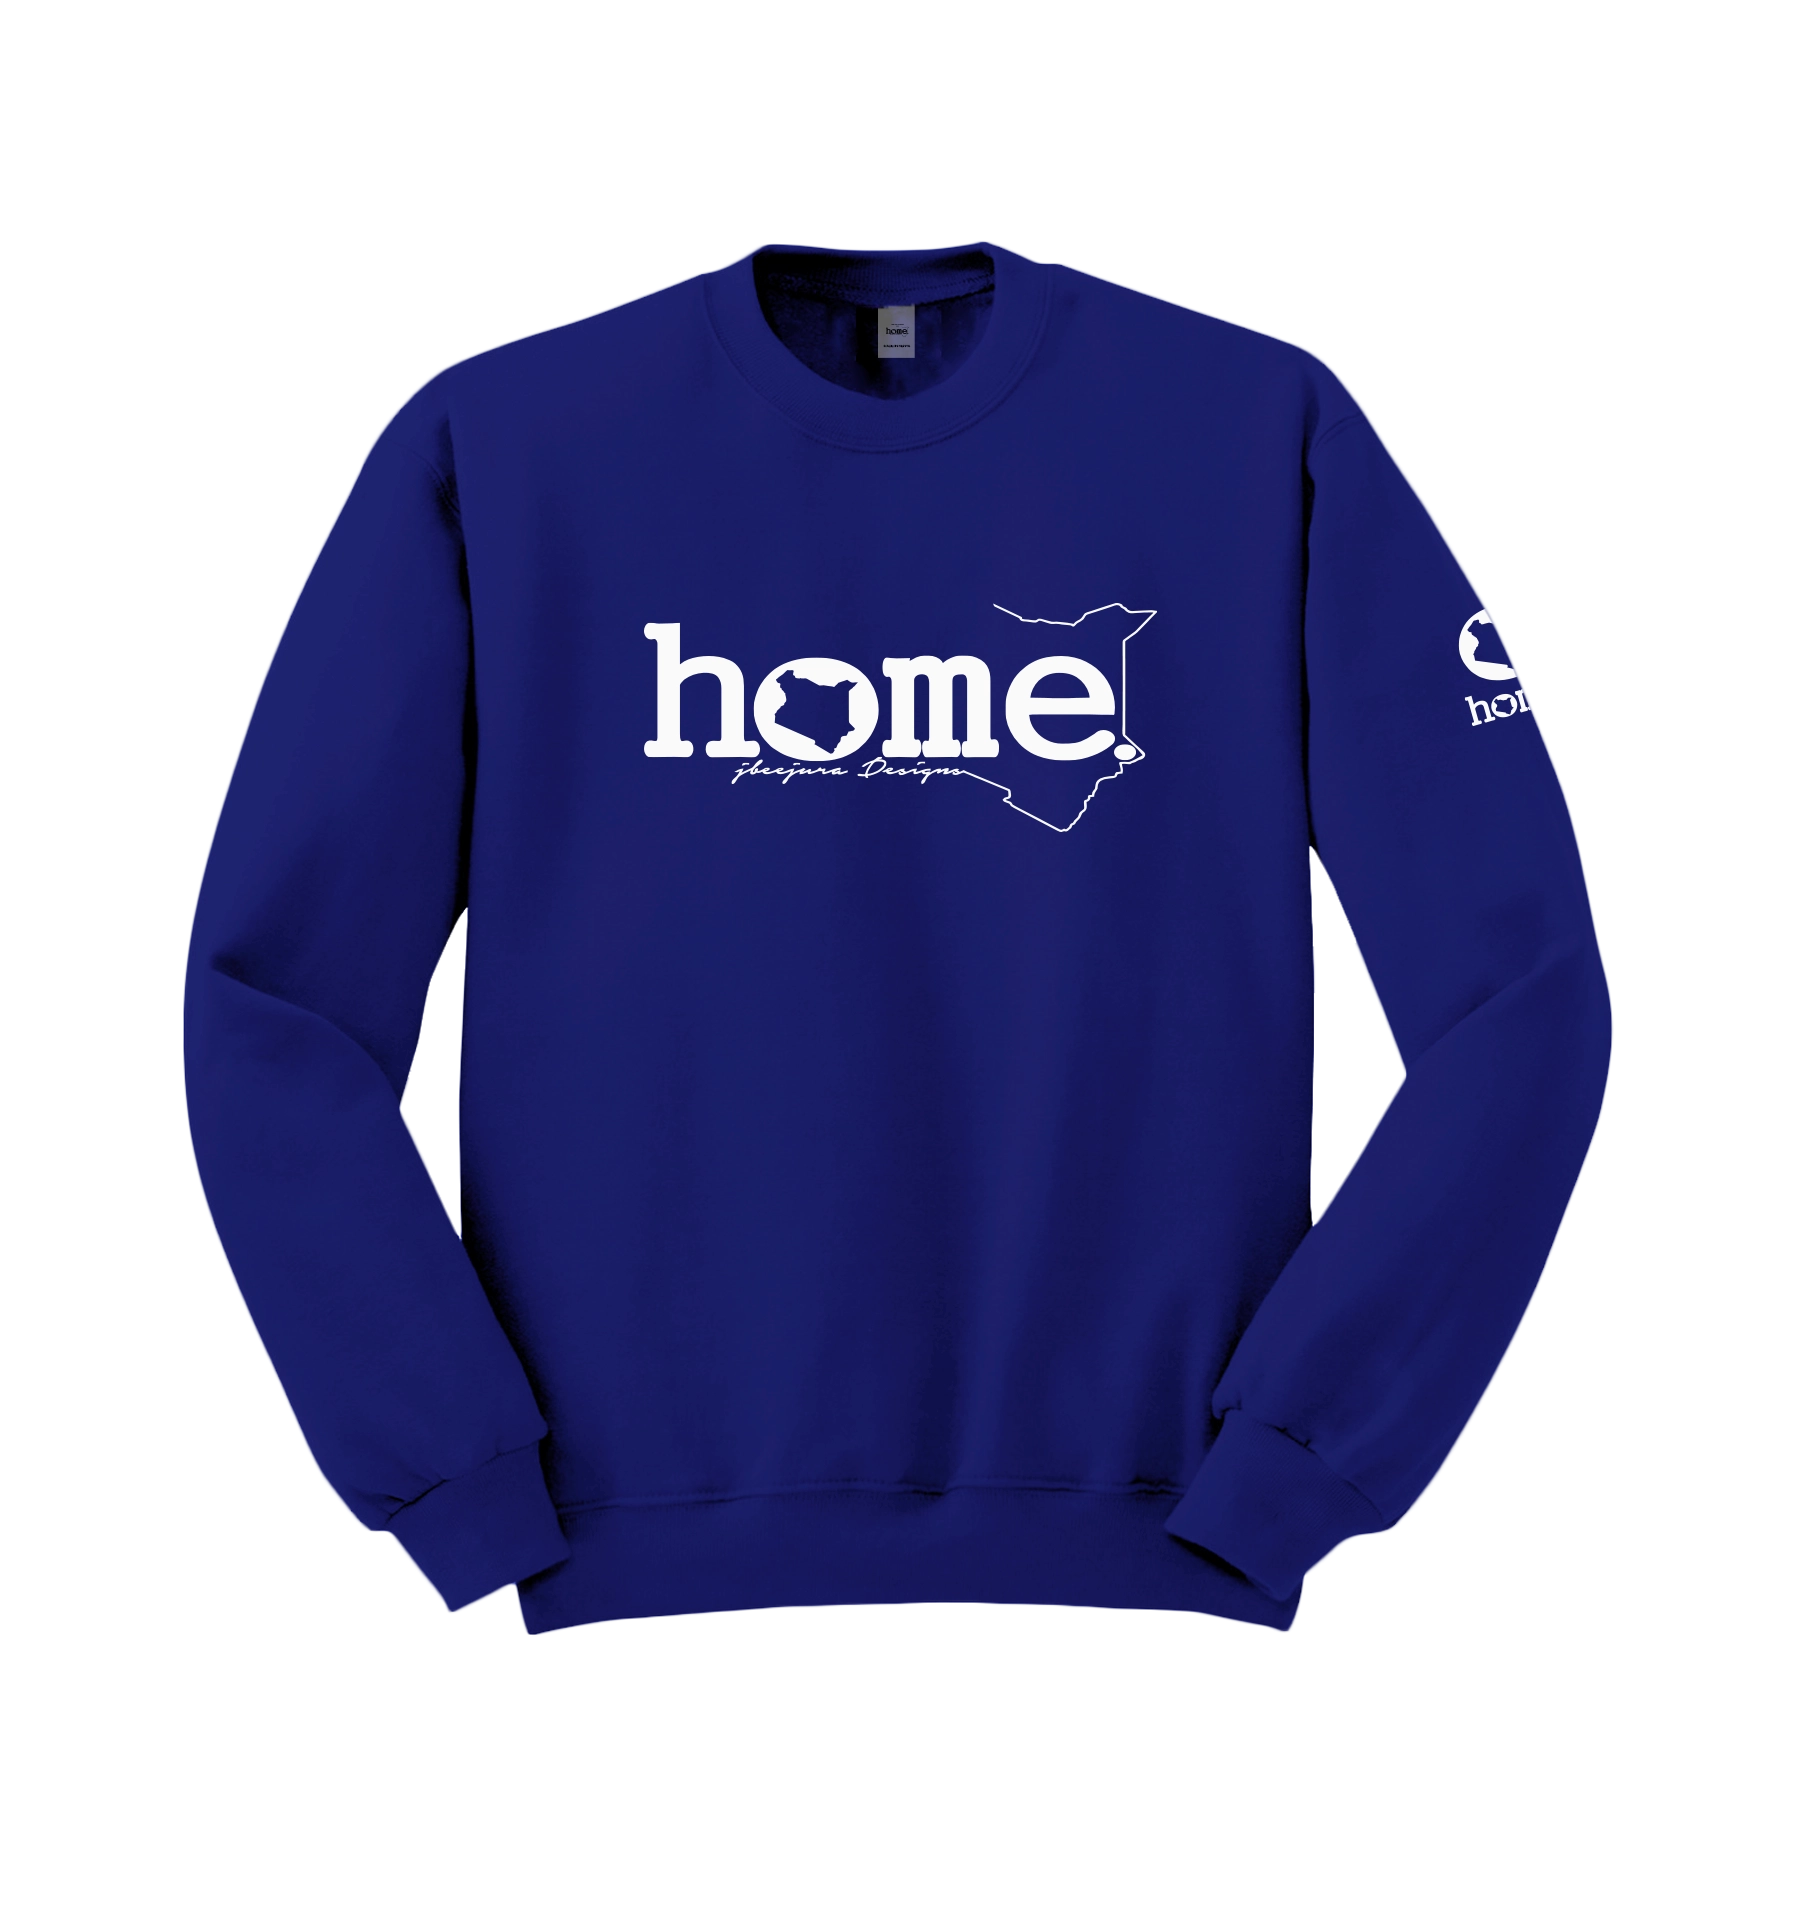 home_254 ROYAL BLUE SWEATSHIRT (HEAVY FABRIC) WITH A WHITE WORDS PRINT